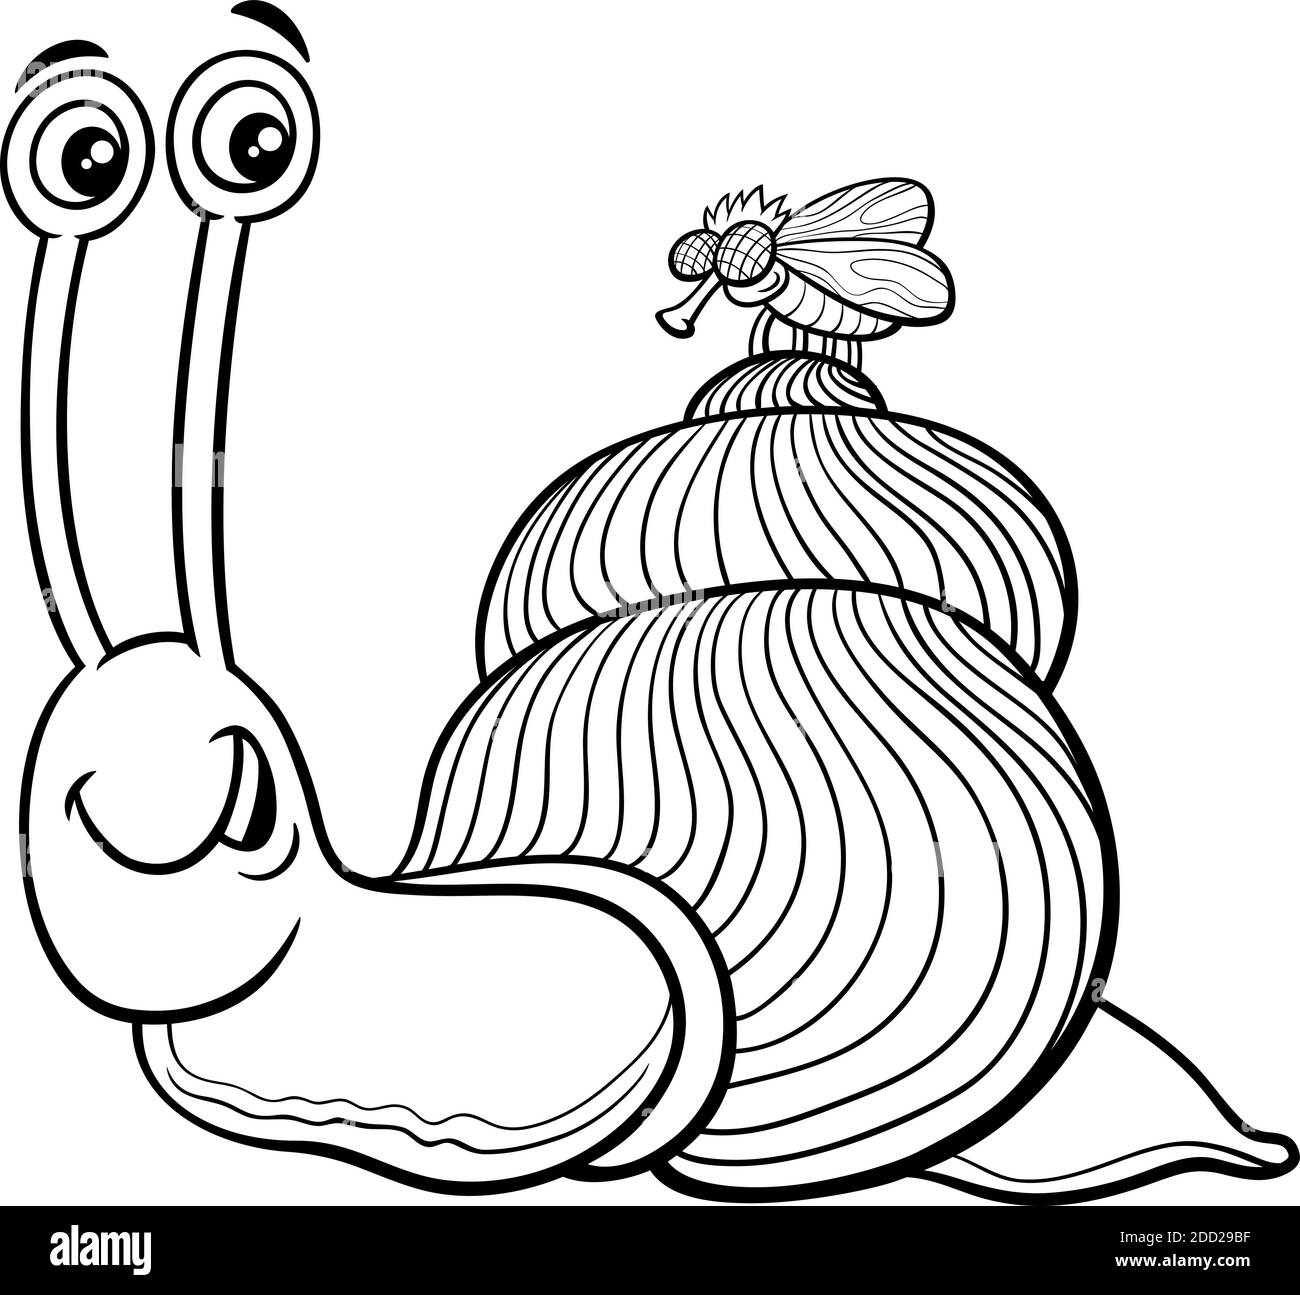 Black and white cartoon illustration of snail and fly insect animal characters coloring book page Stock Vector